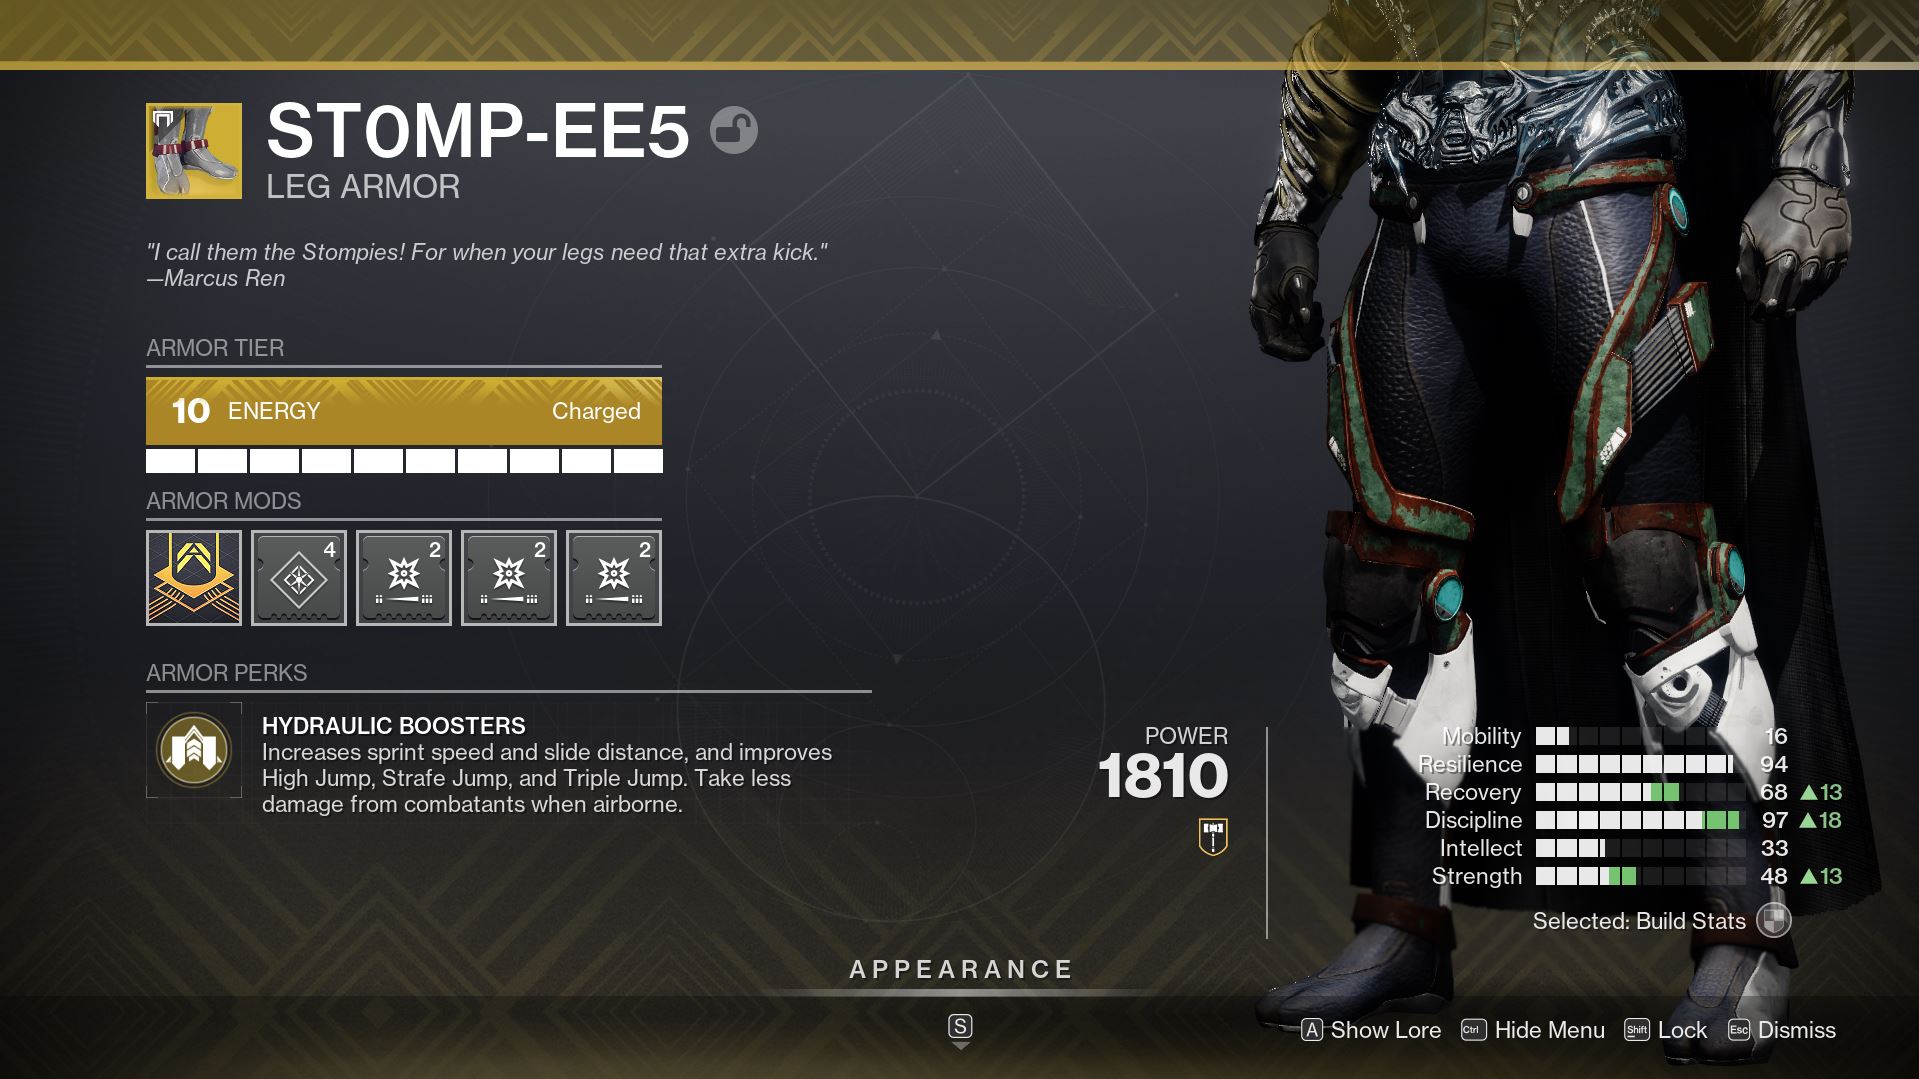 Destiny 2 Stomp-ees Destiny 2 Has Seemingly Leaked New Exotic Armor Changes In-Game